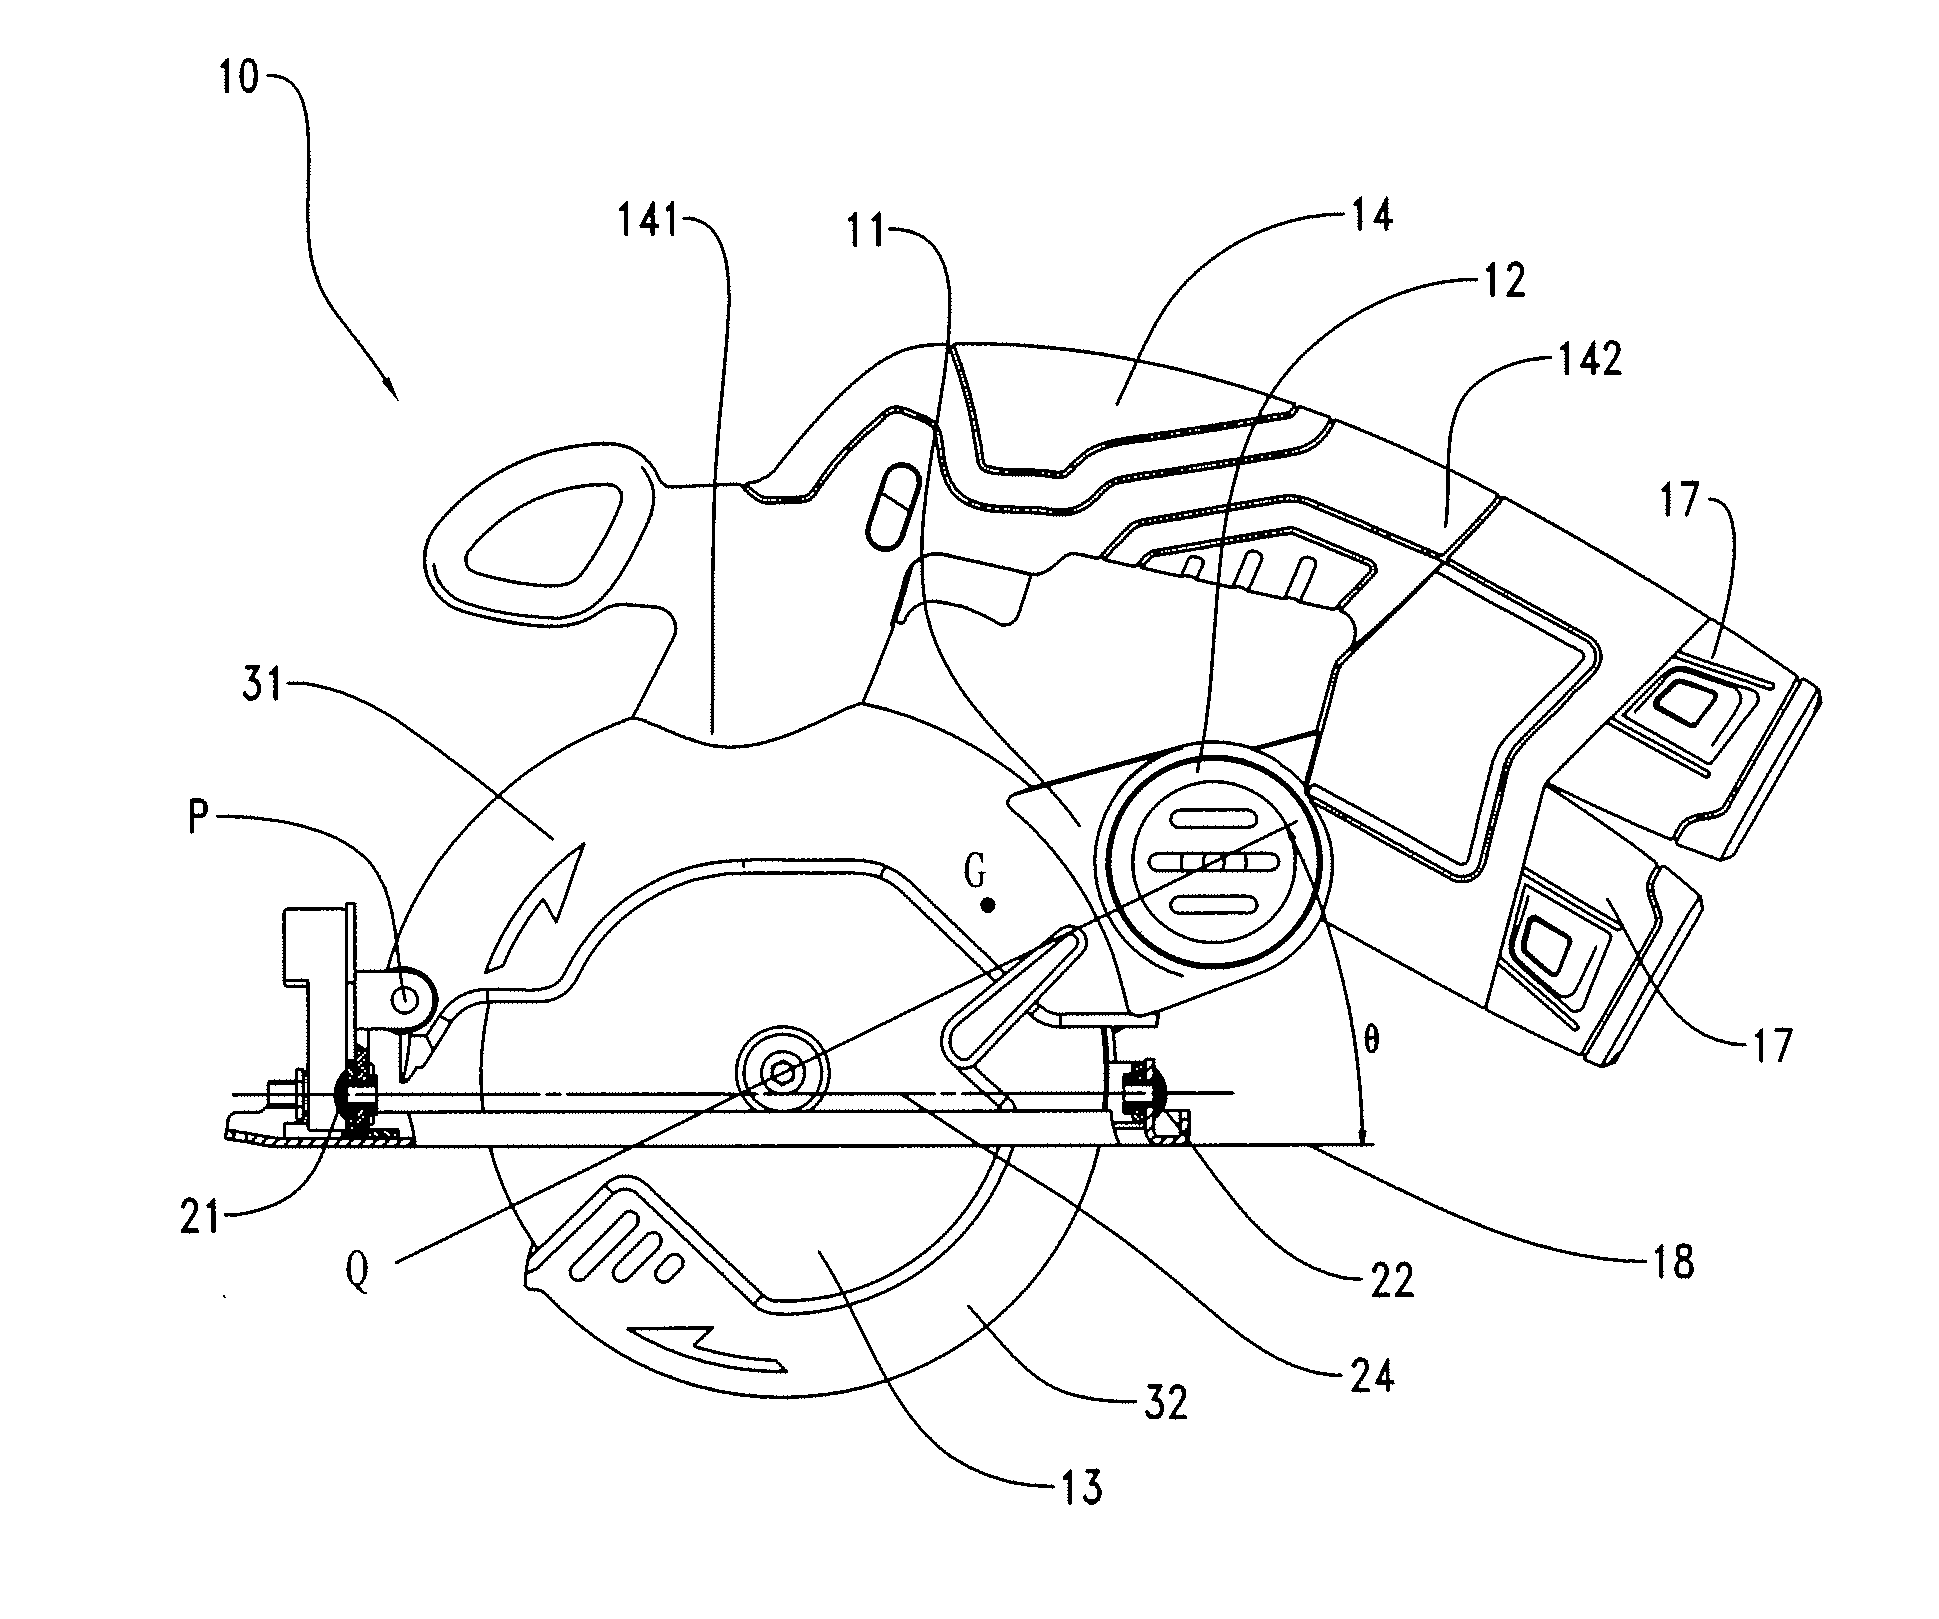 Circular saw having a direct current power supply